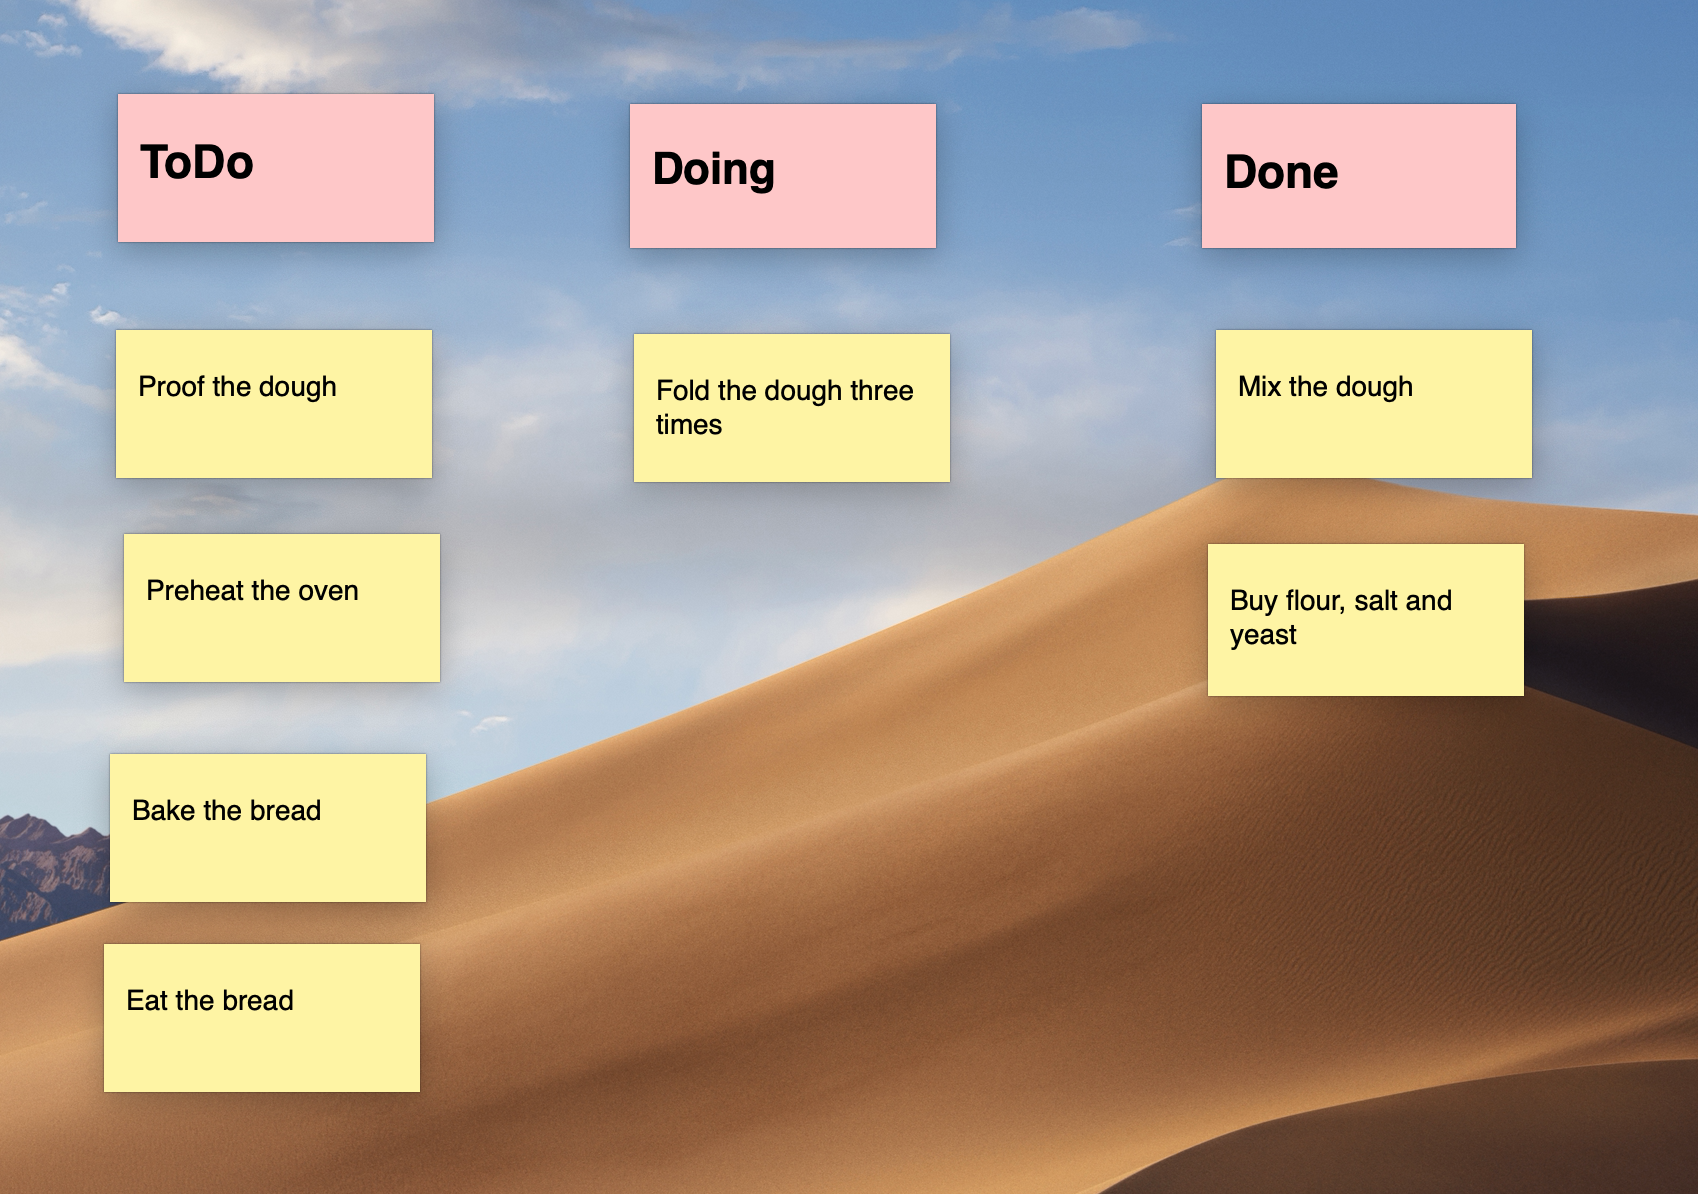 A simple agile board using macOS
Stickies